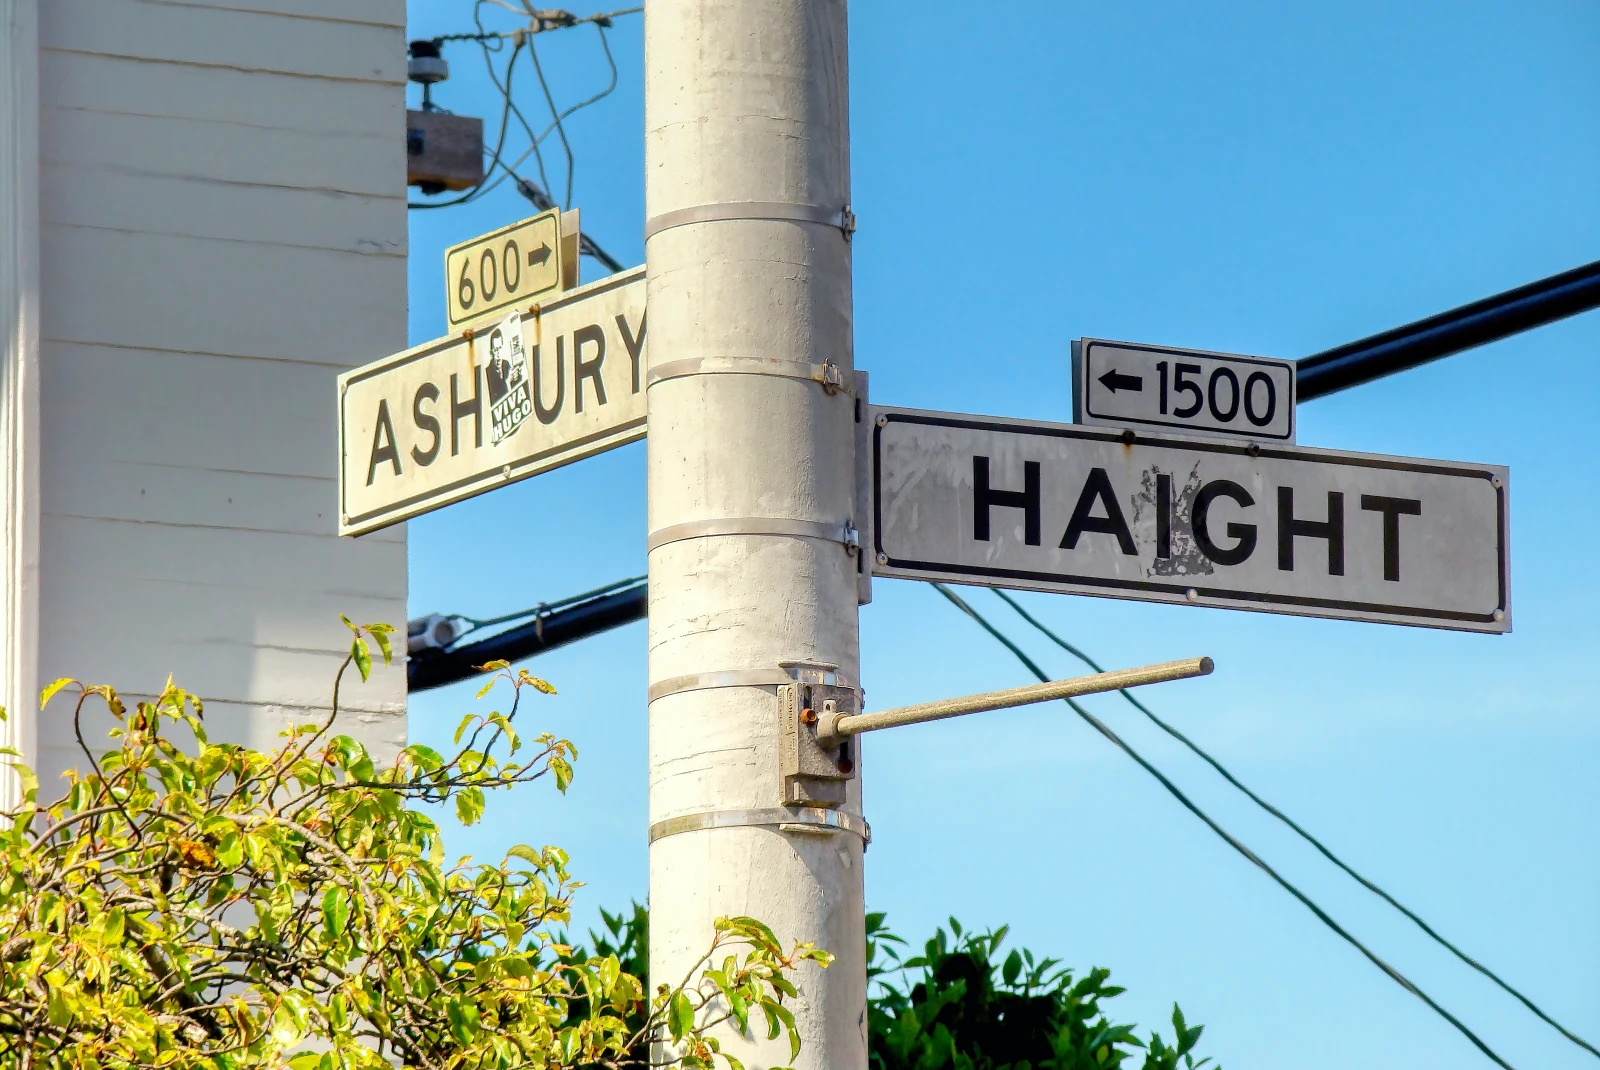 two street signs during daytime